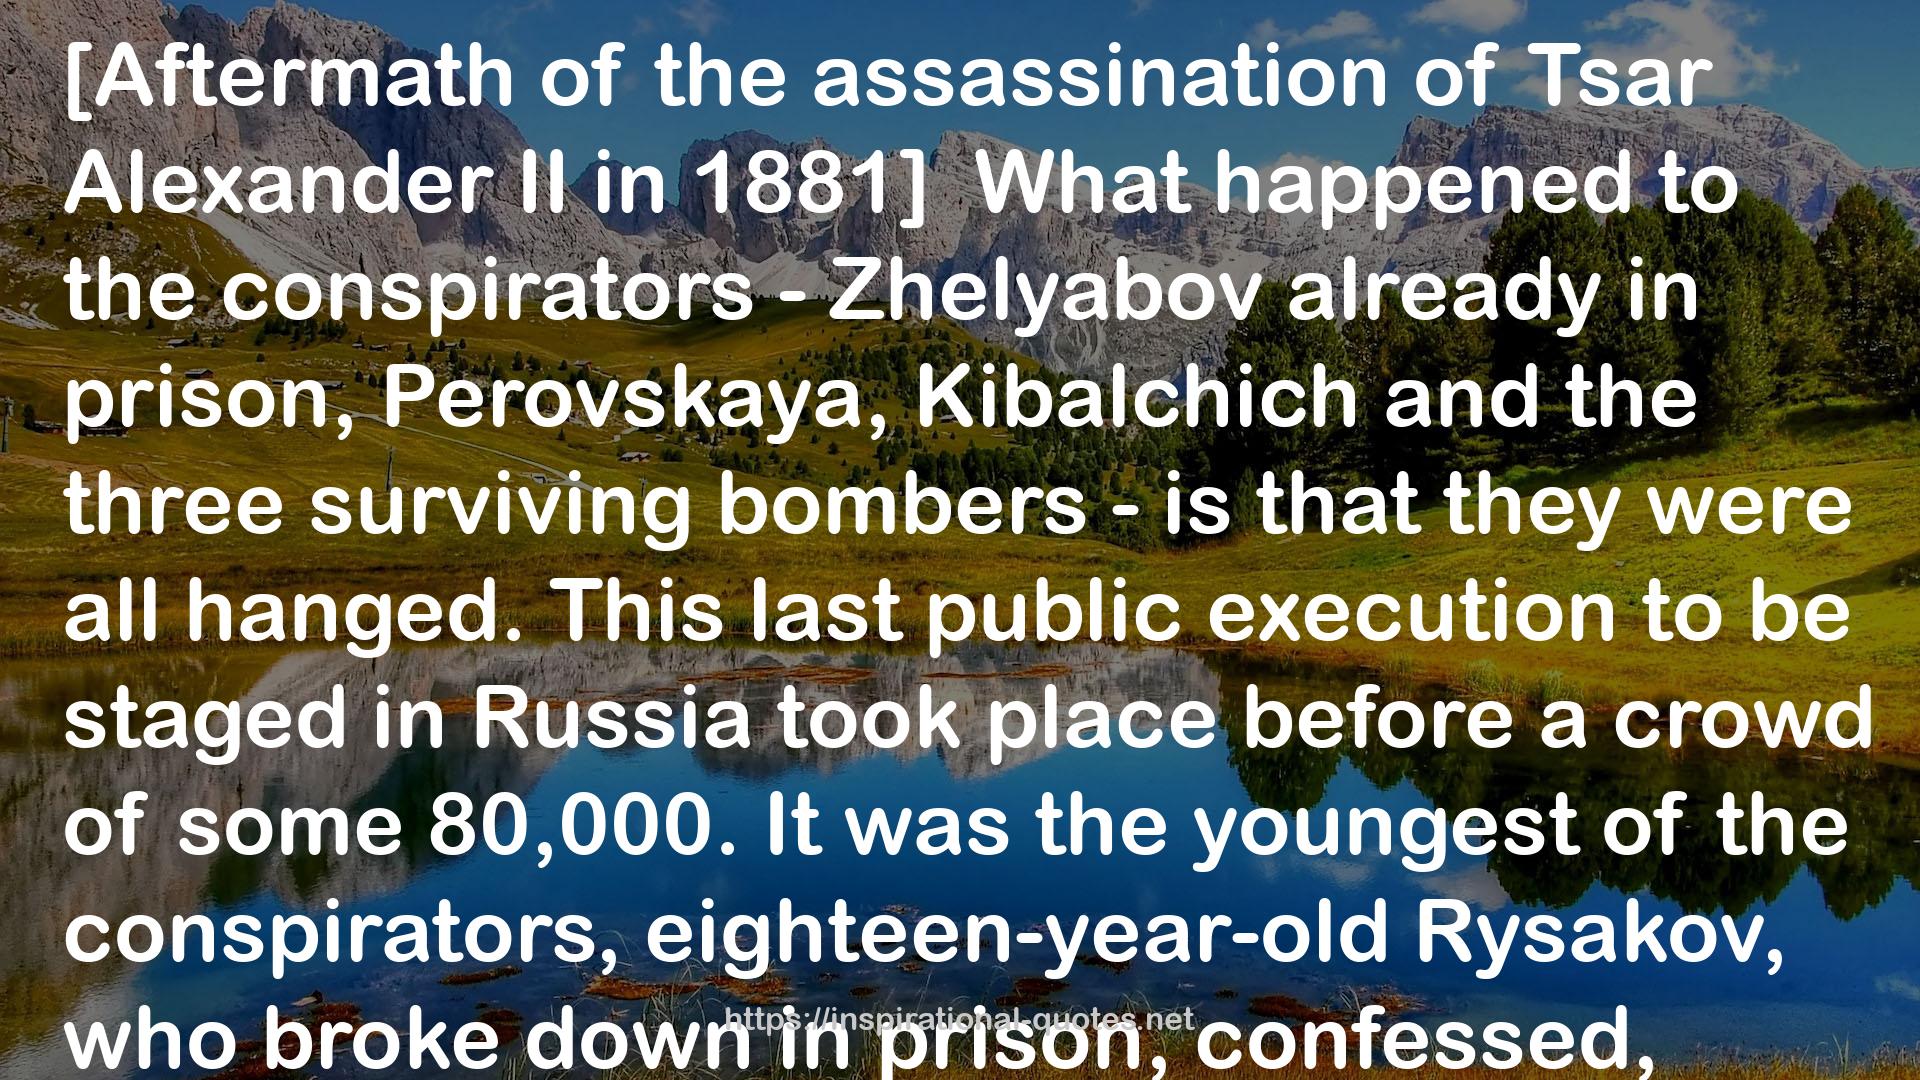 The Shadow of the Winter Palace: Russia's Drift to Revolution 1825-1917 QUOTES